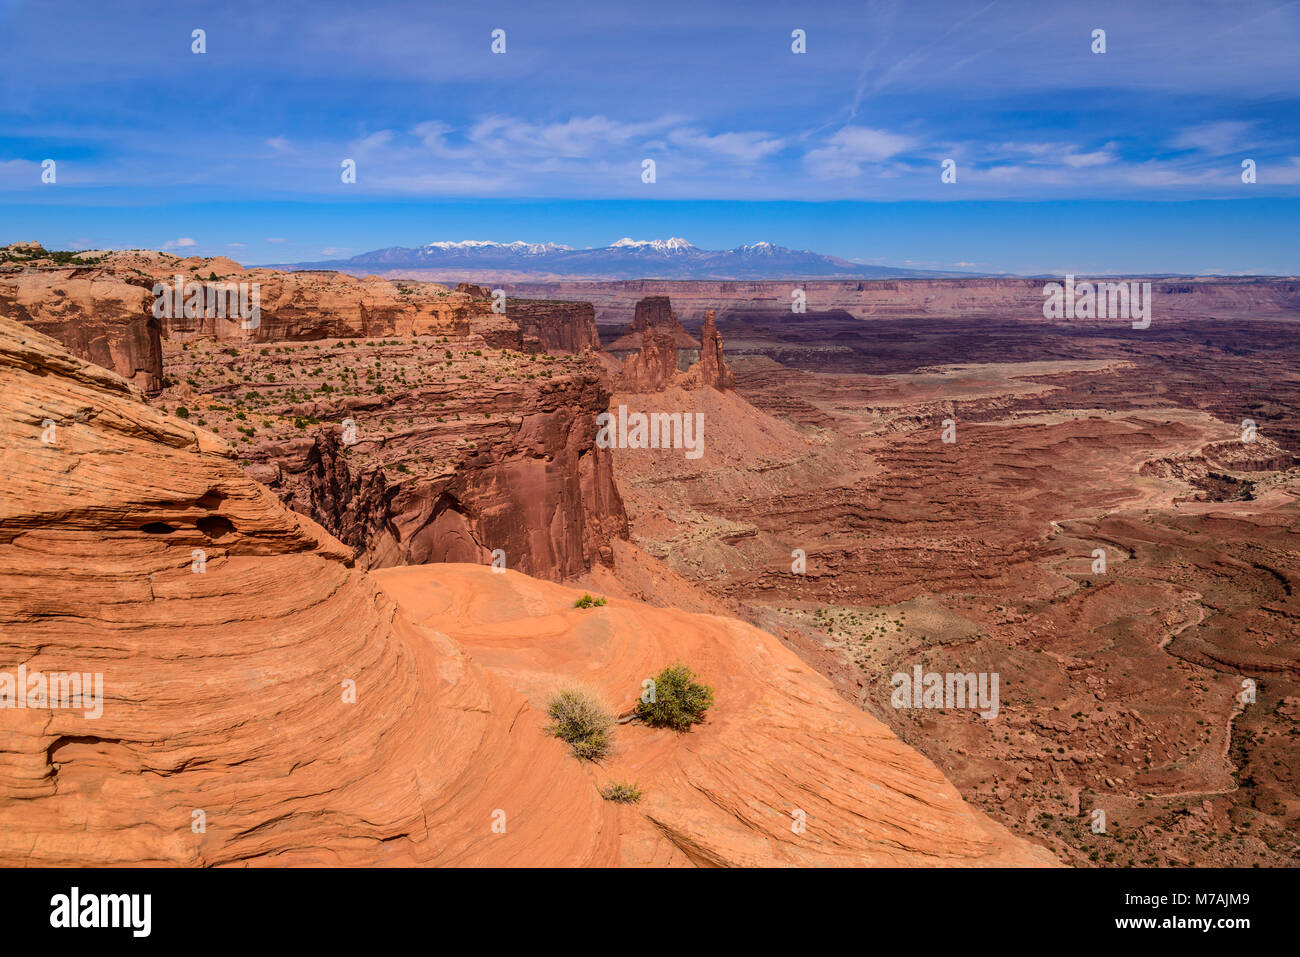 The USA, Utah, San Juan county, Moab, Canyonlands National Park, Island in the Sky, View into the Mesa Arch towards La Sal Mountains Stock Photo